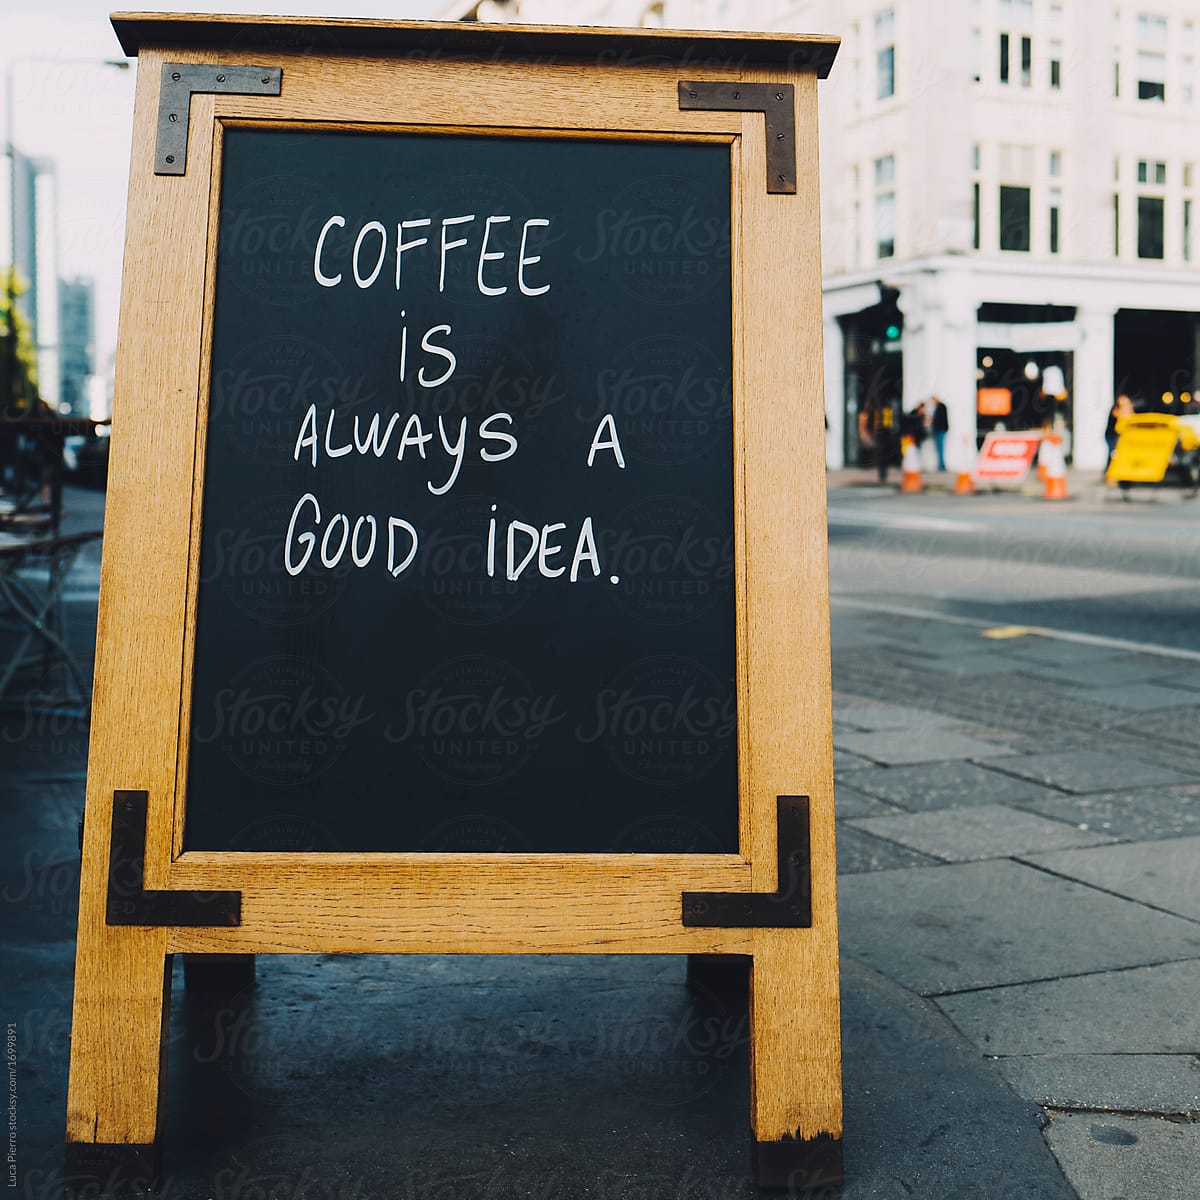 Quote about coffee on a board along the street